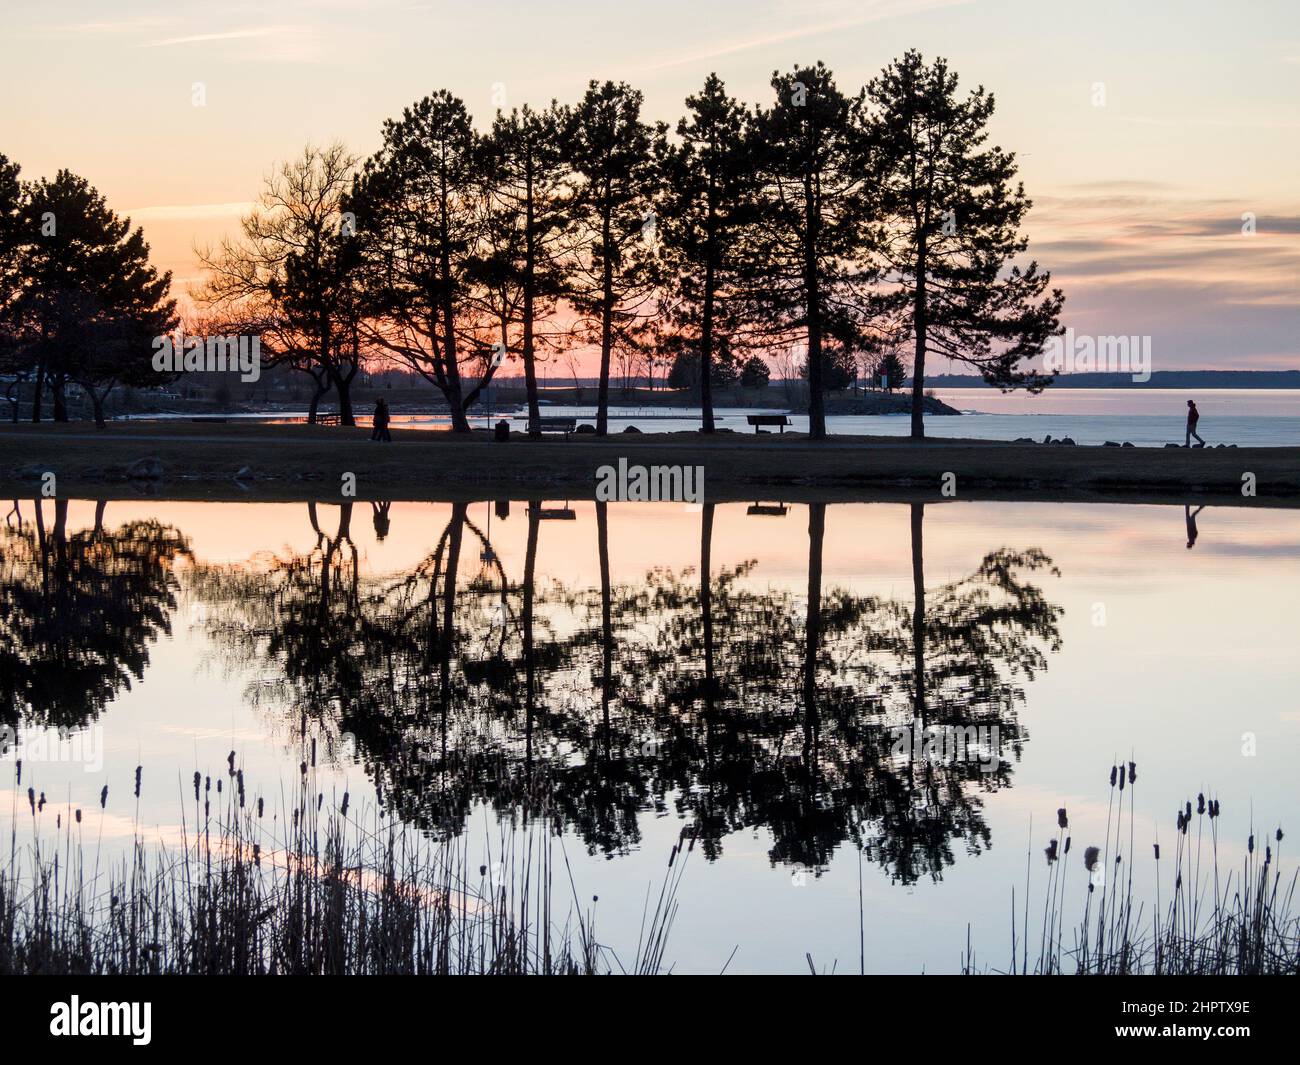 Sunset in the Park: Park goers walk by a row of trees reflected in a pond as the sun sets on an early spring day. Stock Photo